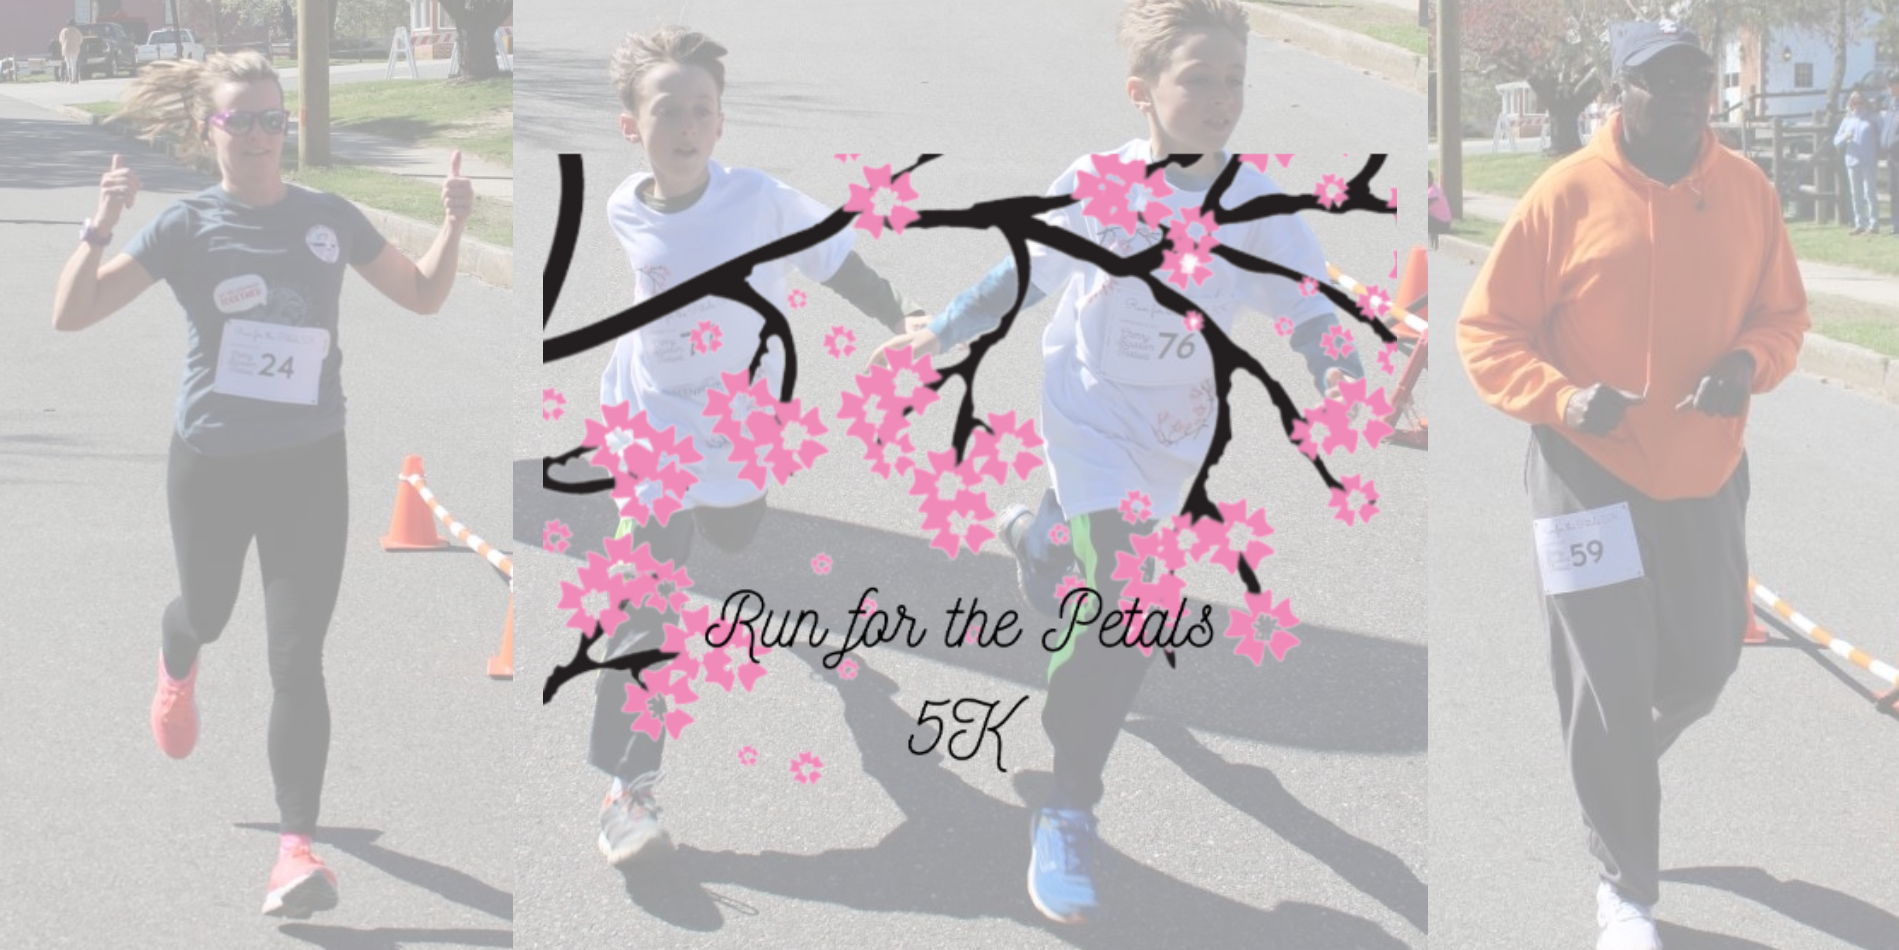 Run for the Petals 5K promotional image